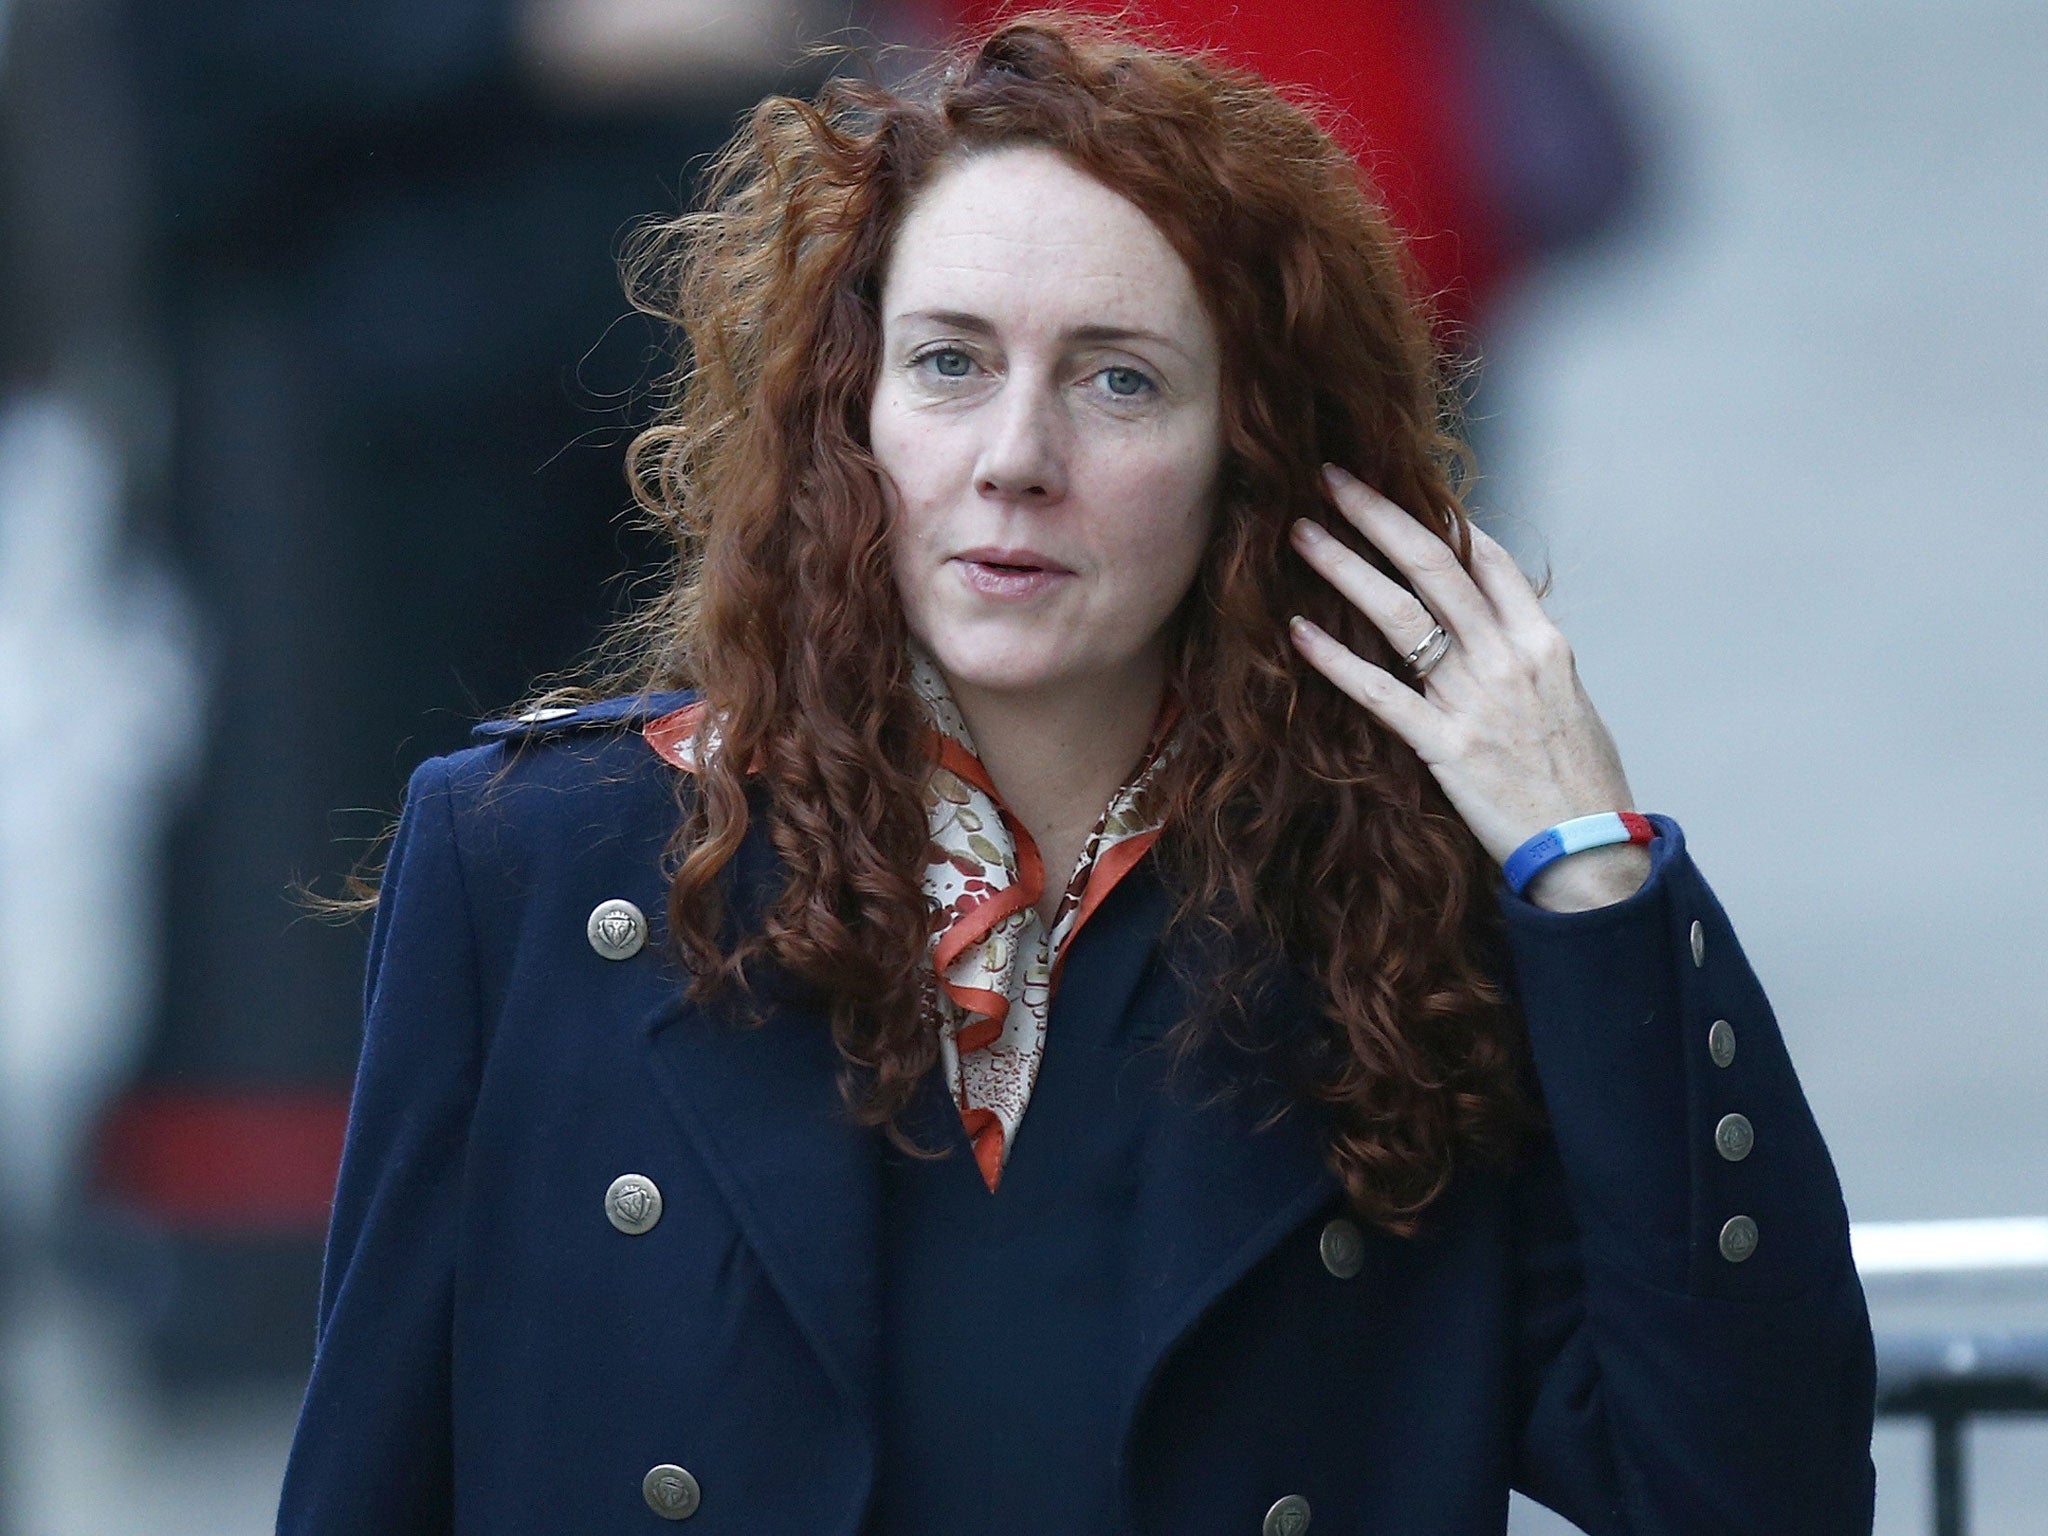 Rebekah Brooks sanctioned a payment of £4,000 to a public official back in 2006 for a picture of Prince William dressed as a Bond girl in a bikini